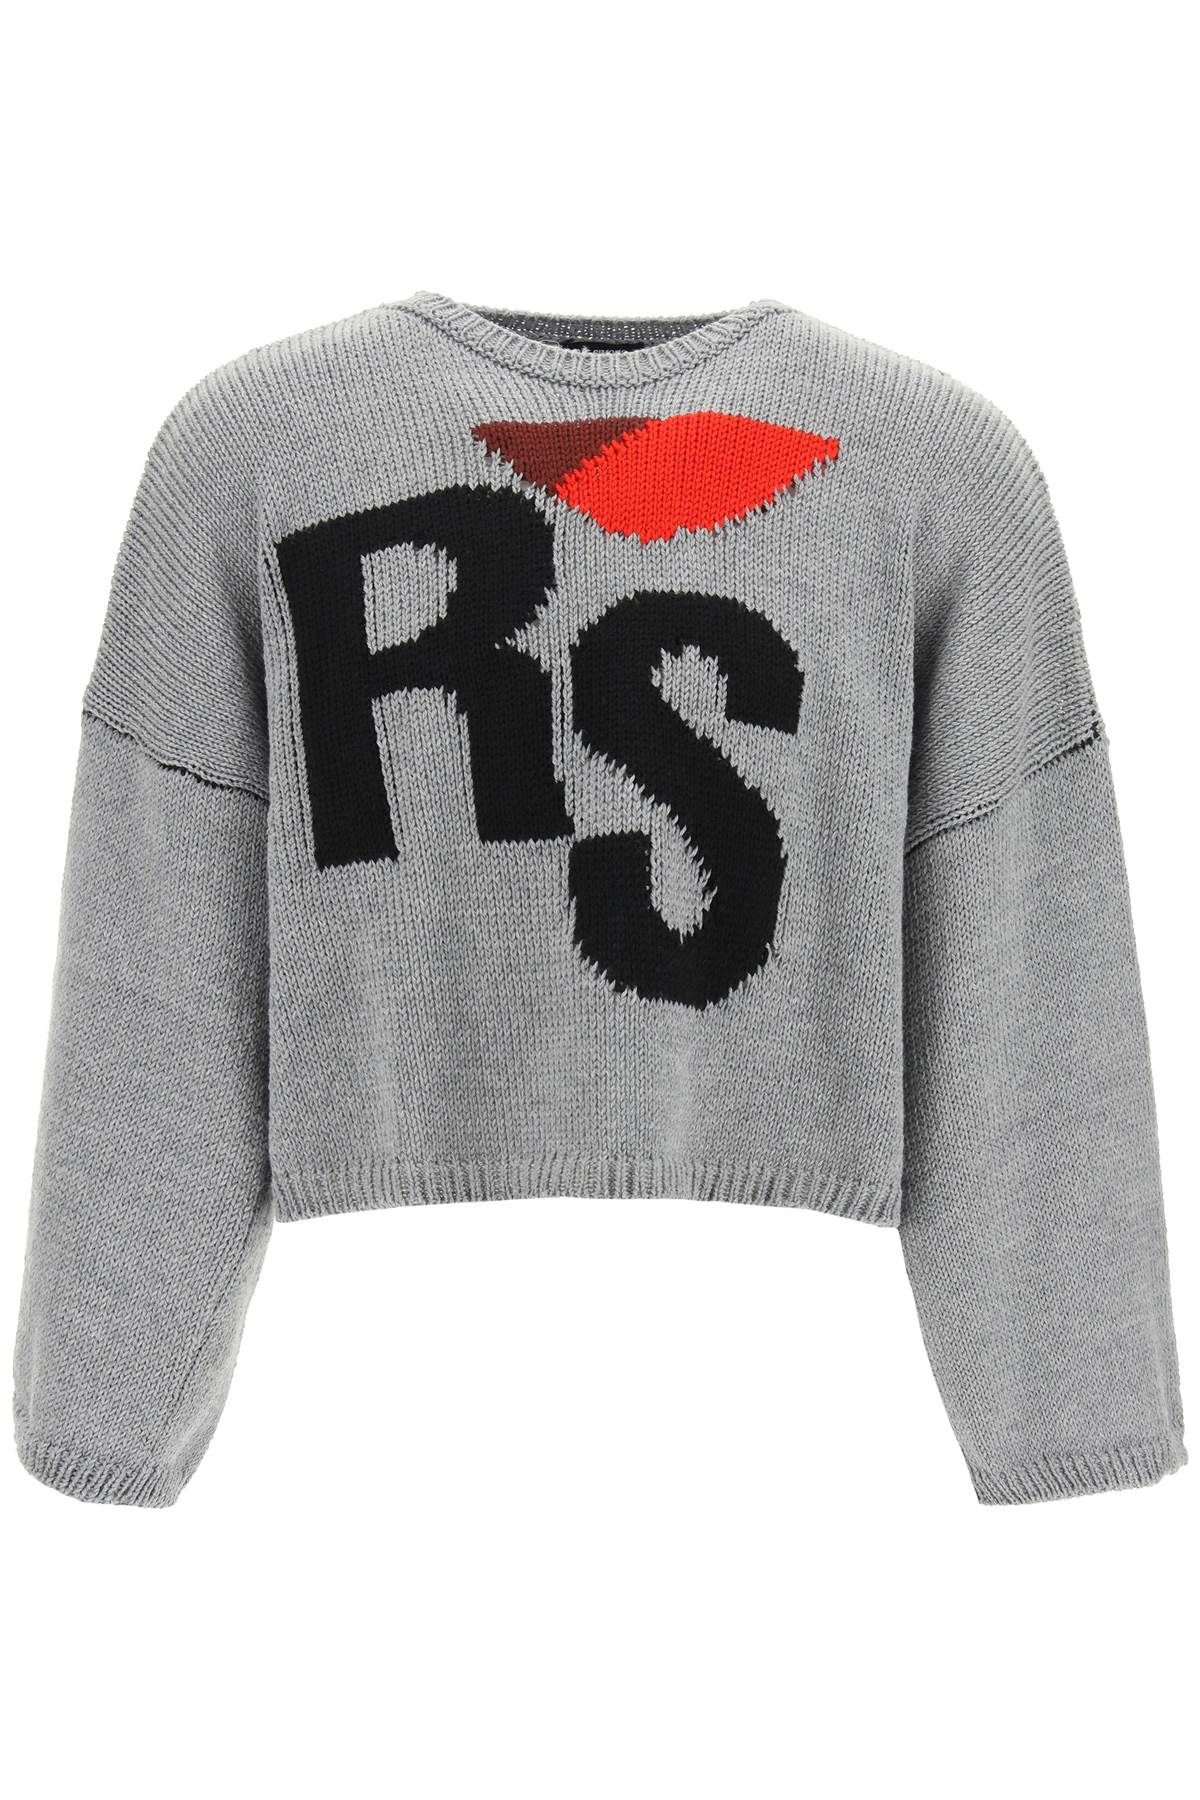 Pre-owned Raf Simons Oversized Sweater Rs Embroidery In Mixed Colours